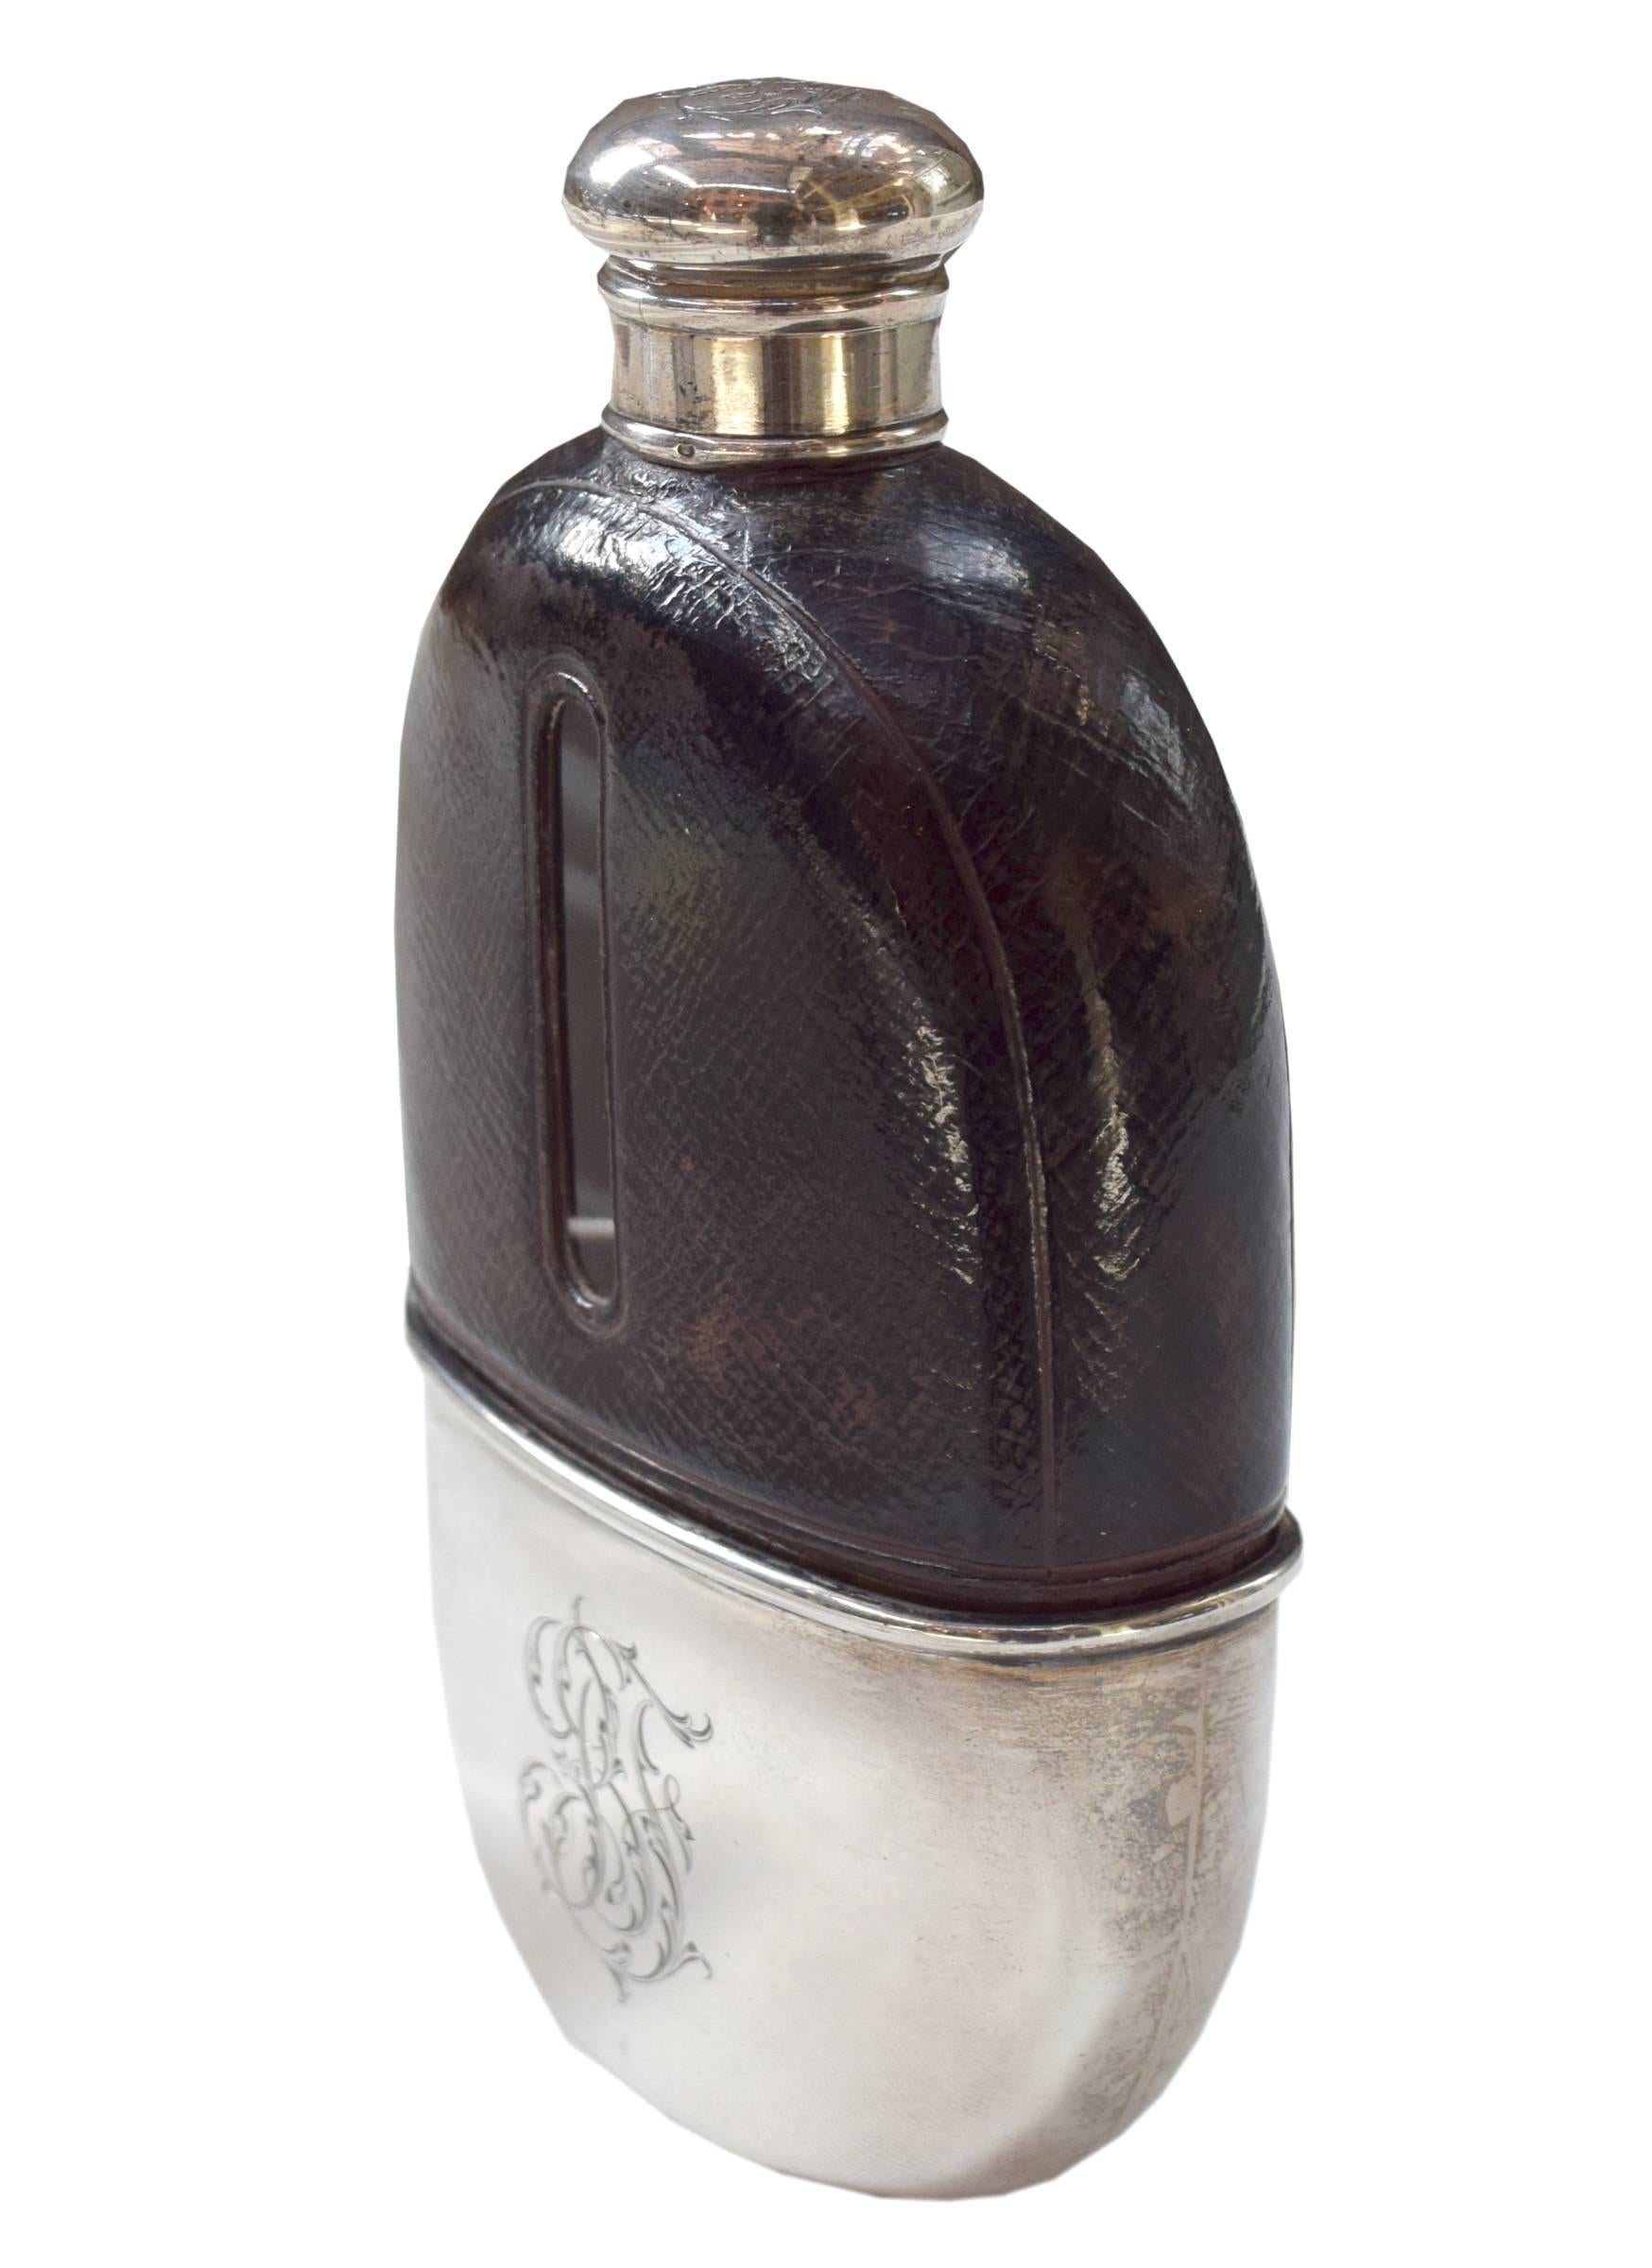 A sterling silver and leather flask from 1812 by Thomas Jenkins of London with a monogrammed gold lined cup and screw top cap.